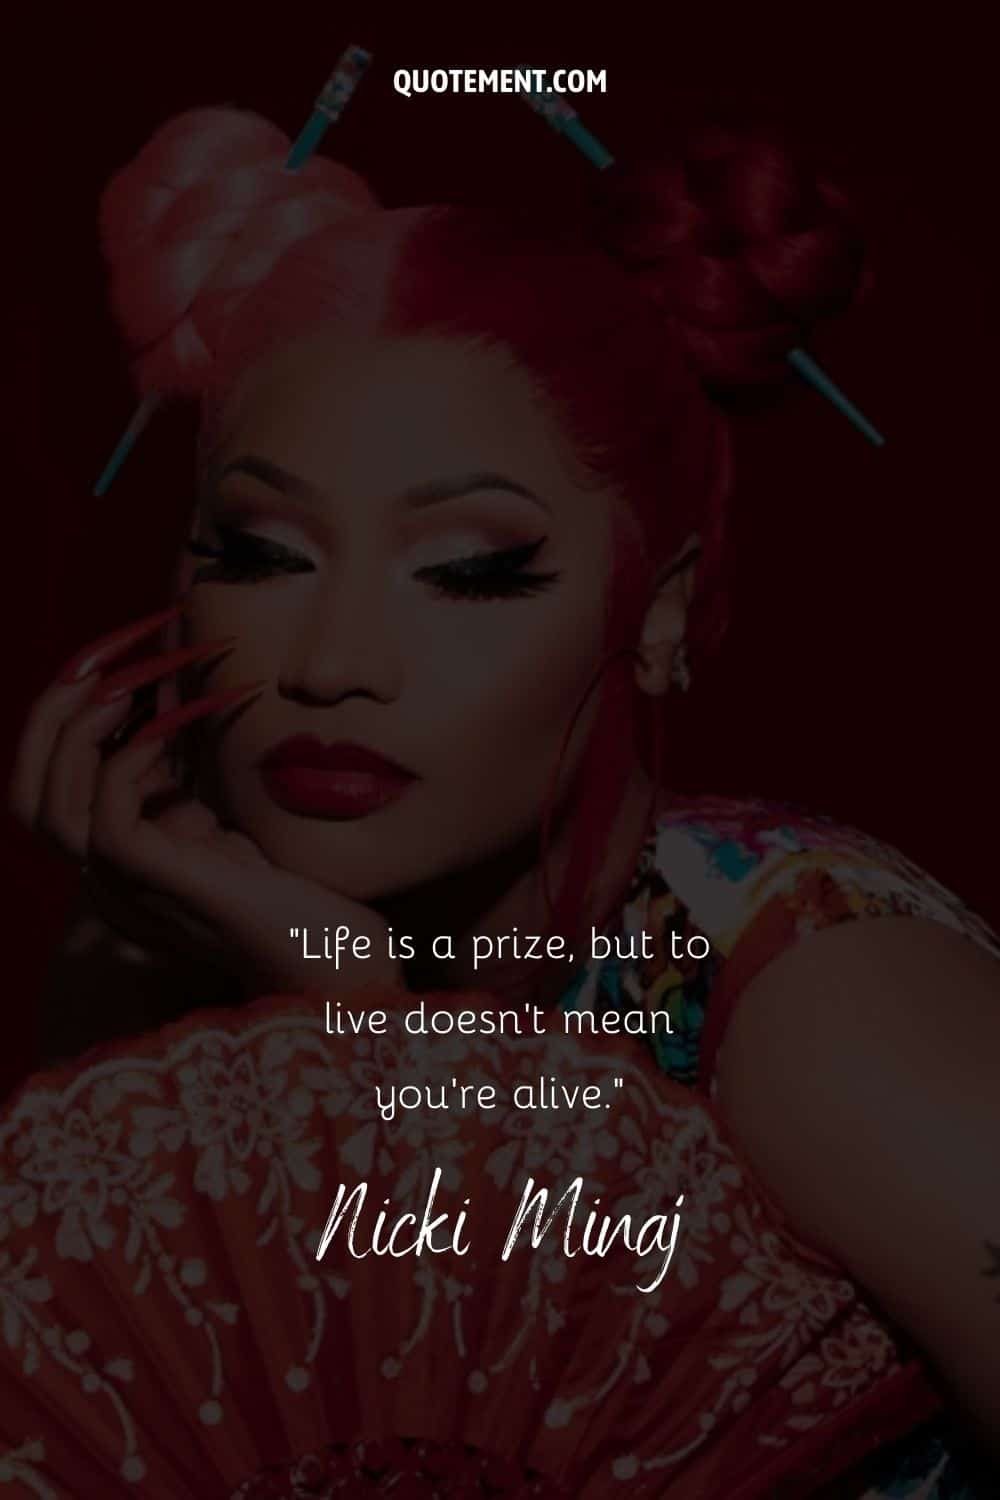 Motivational quote by Nicki and her portrait in the background, too